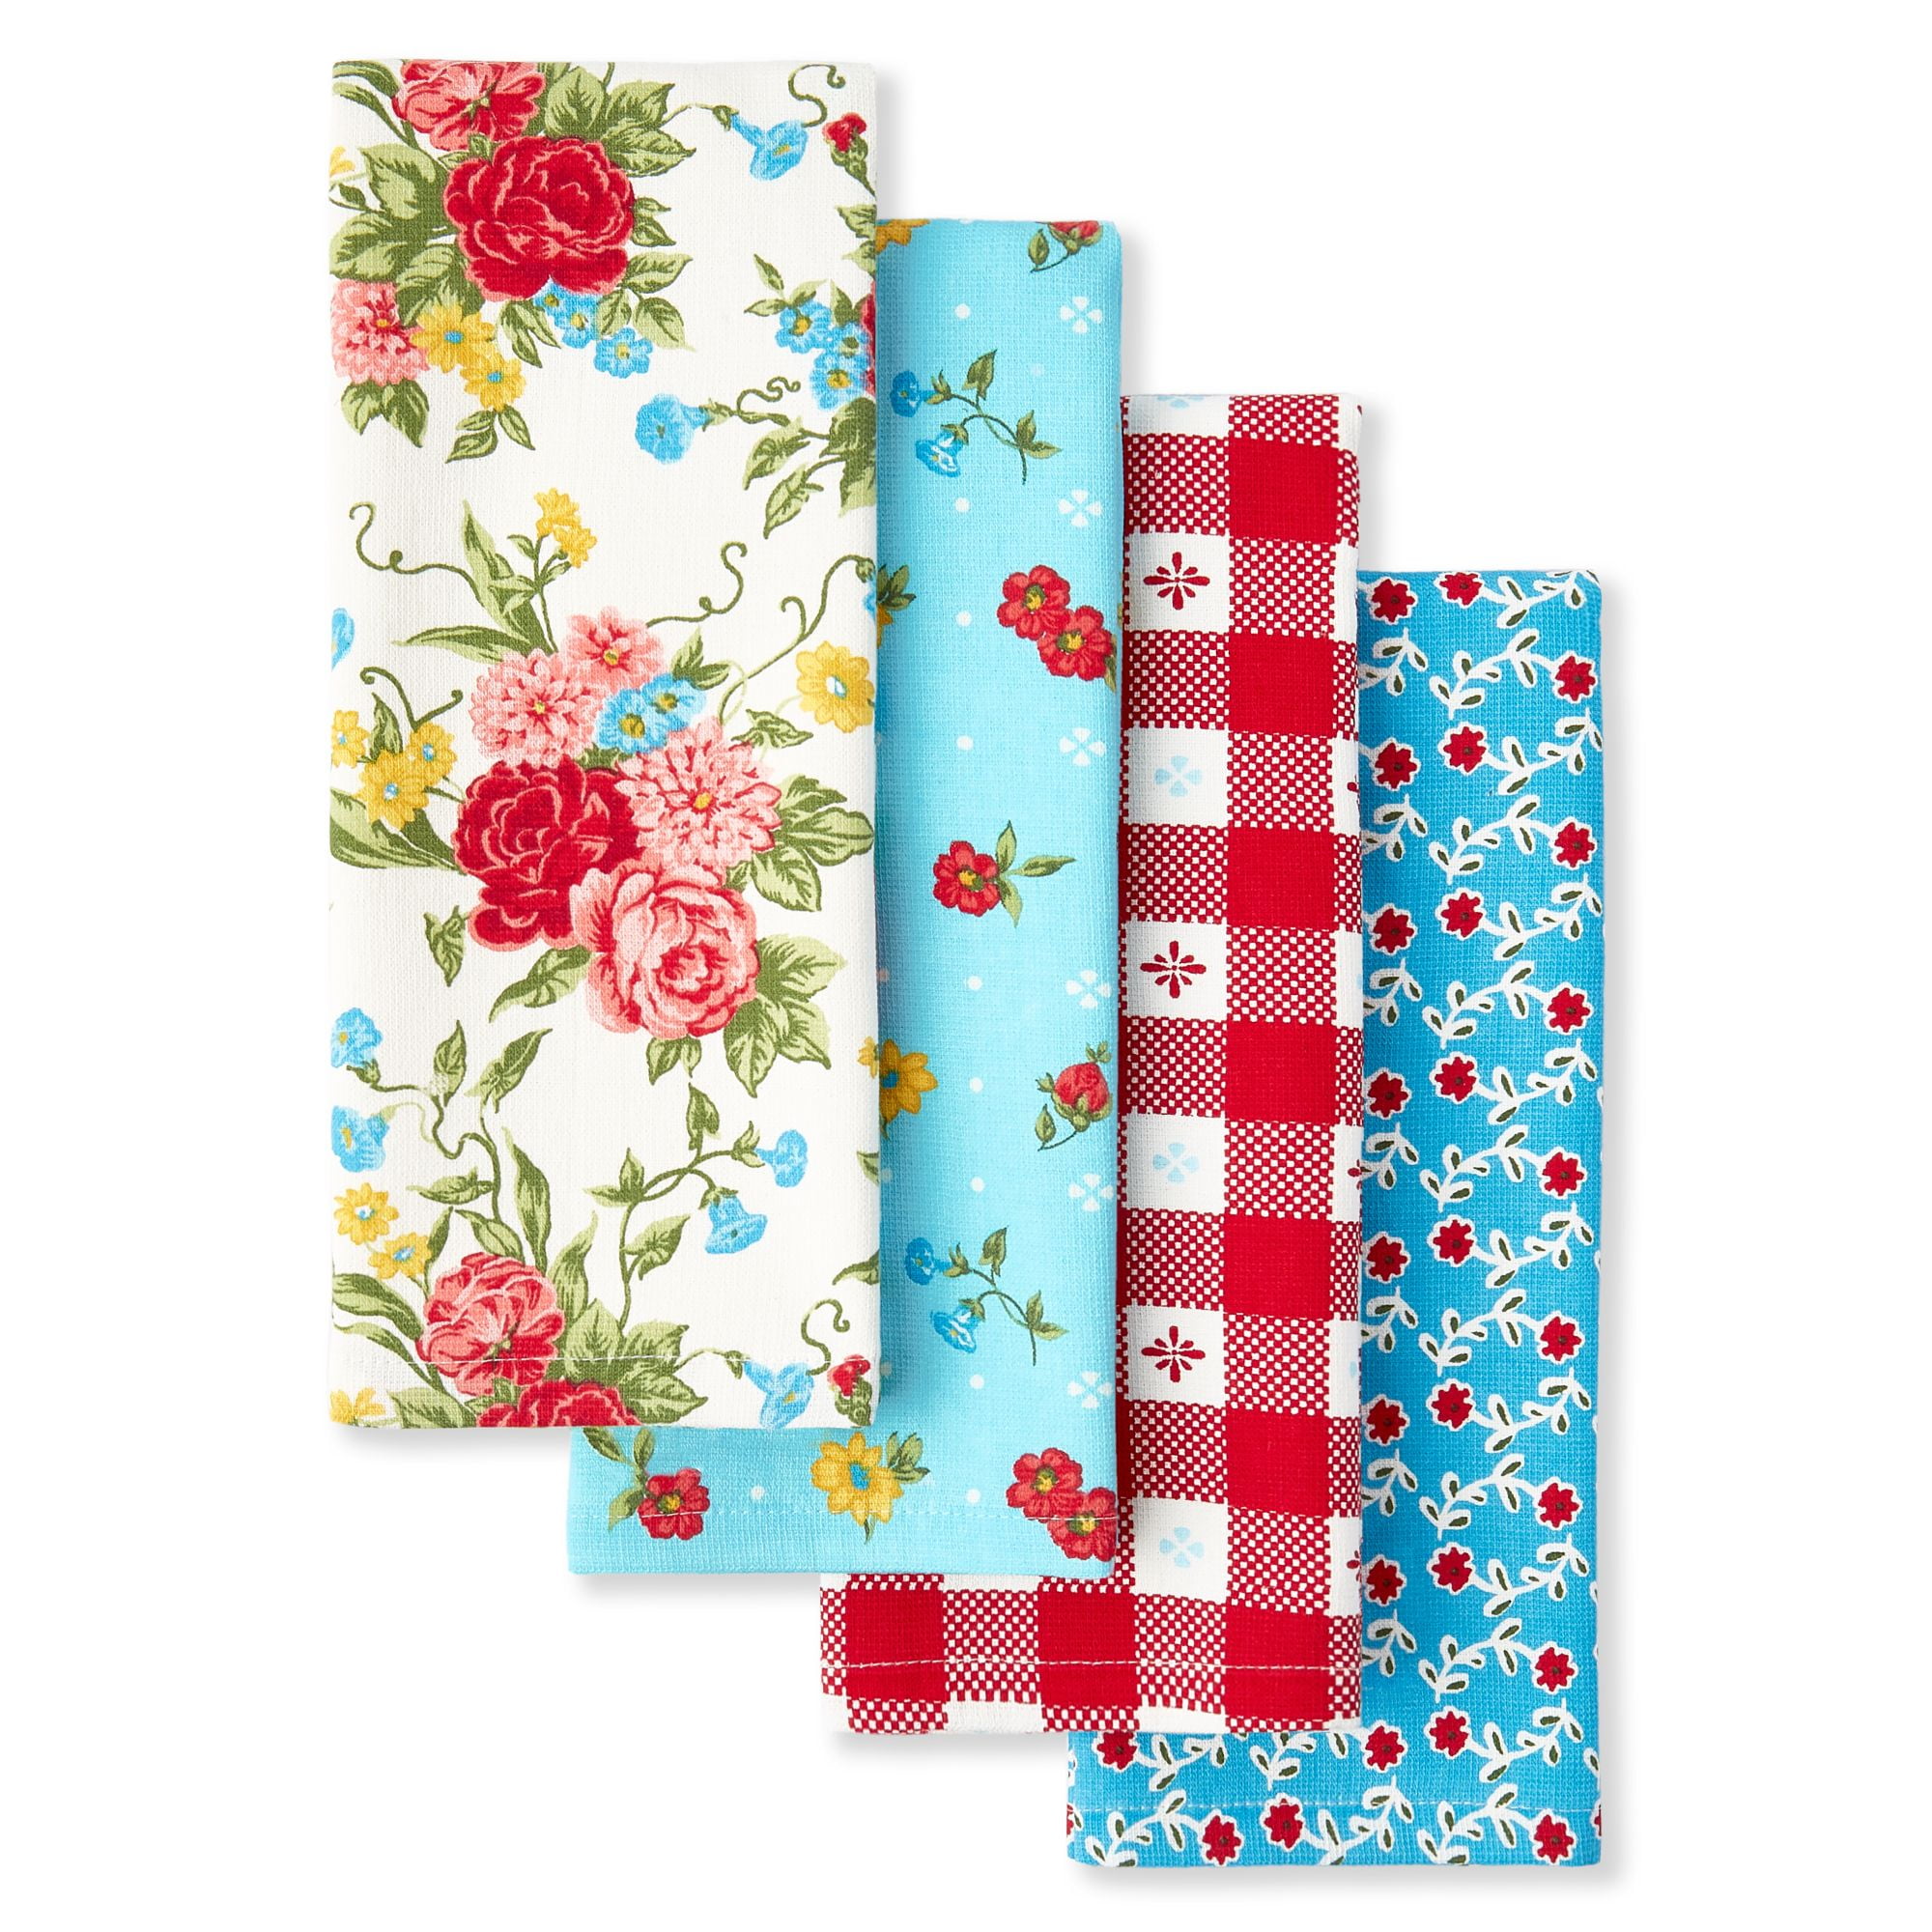 The Pioneer Woman Sweet Rose Kitchen Towel Set, Multicolor, 16"W x 28"L, 4 Piece